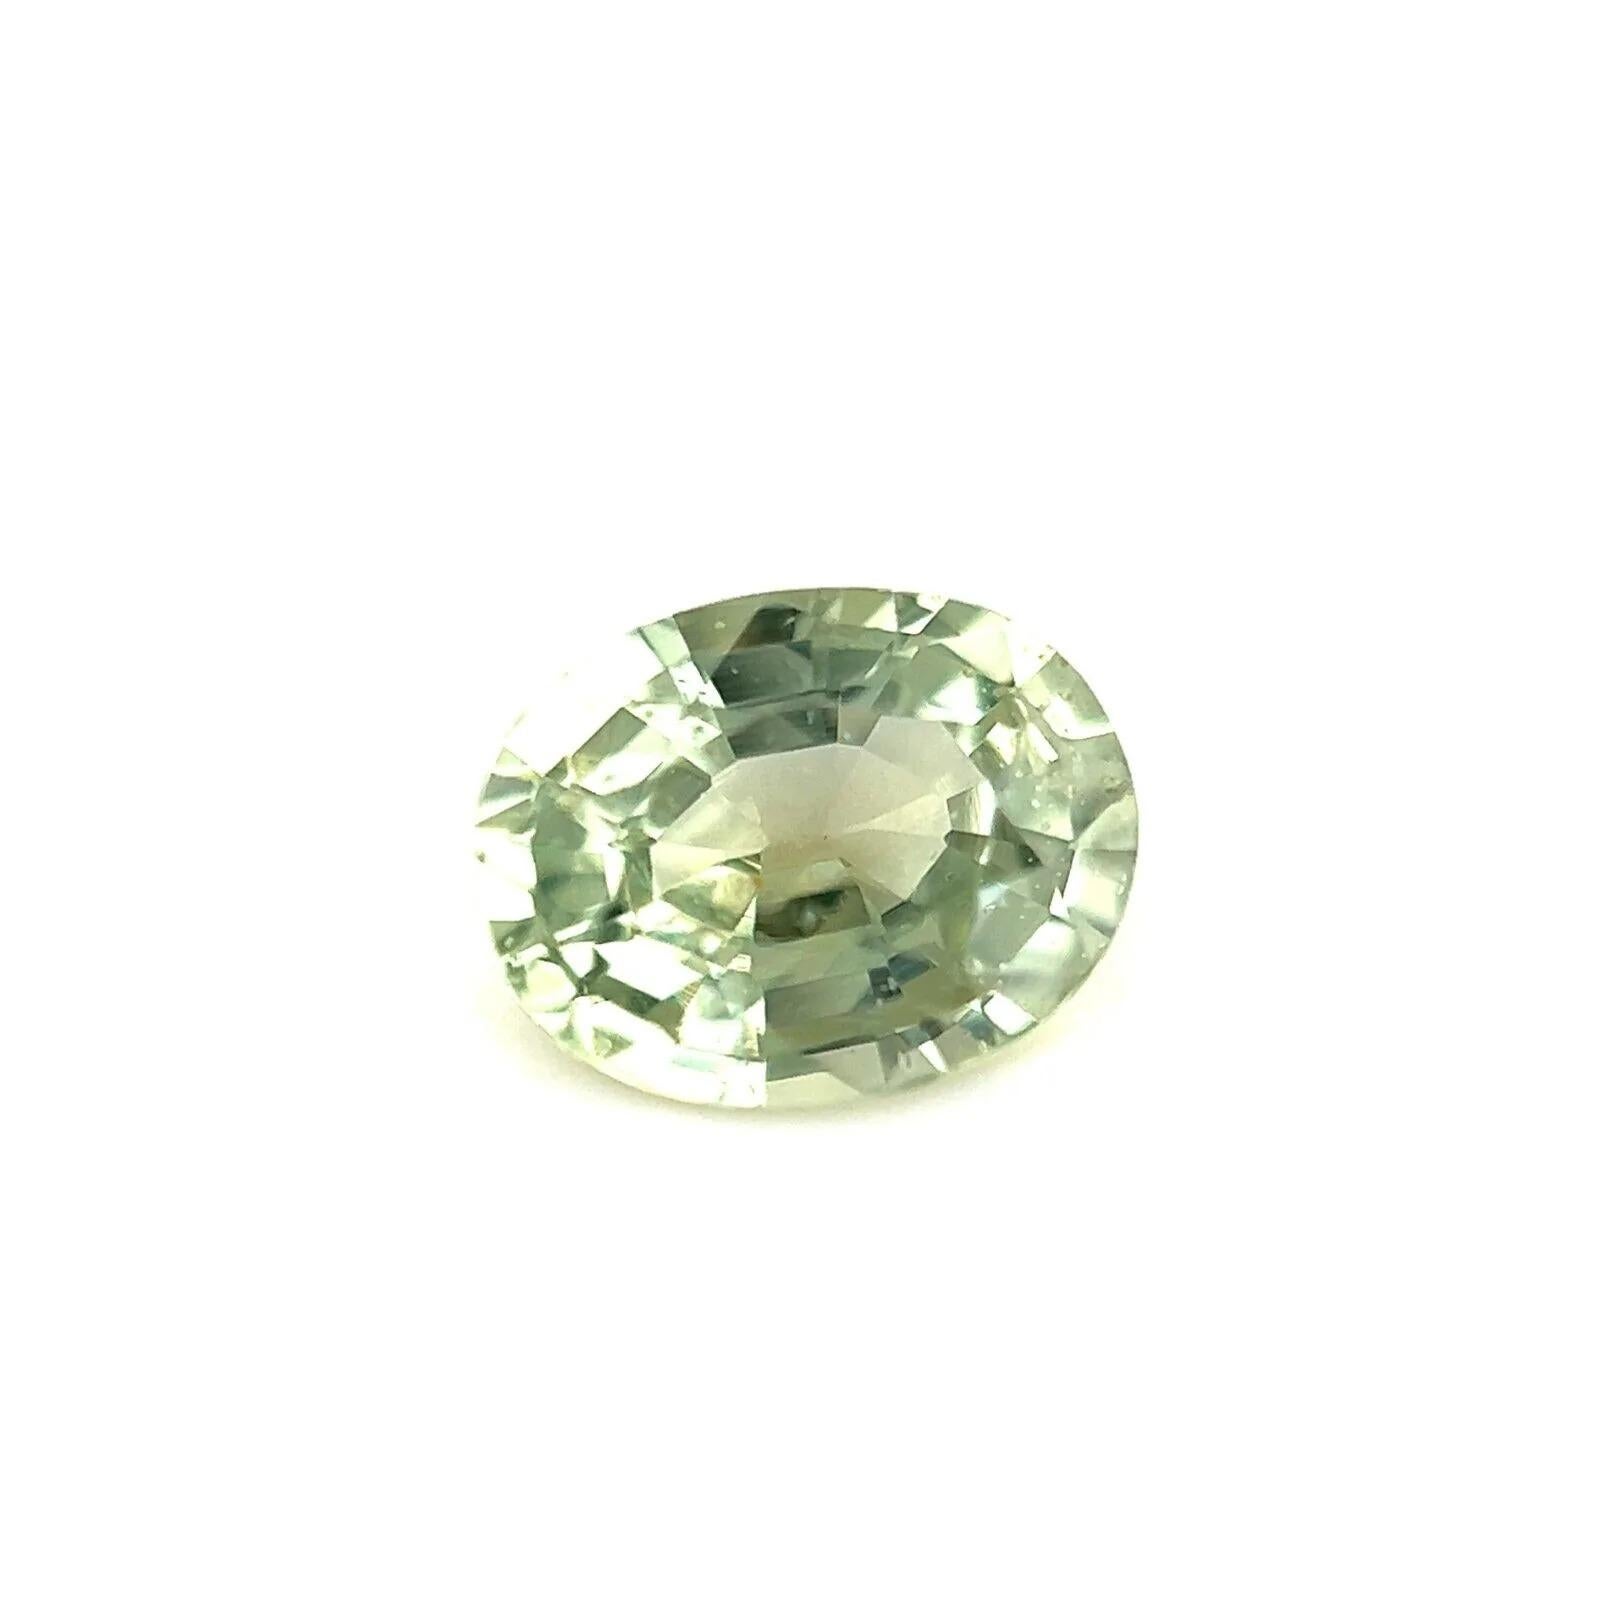 1.03ct Light Green Yellow Sapphire Untreated Oval Cut 6.9x5.4mm No Heat

Fine Natural Light Yellow Green Sapphire Gemstone.
1.03 Carat with a beautiful vivid green yellow colour and very good clarity, a clean stone with some small natural inclusions